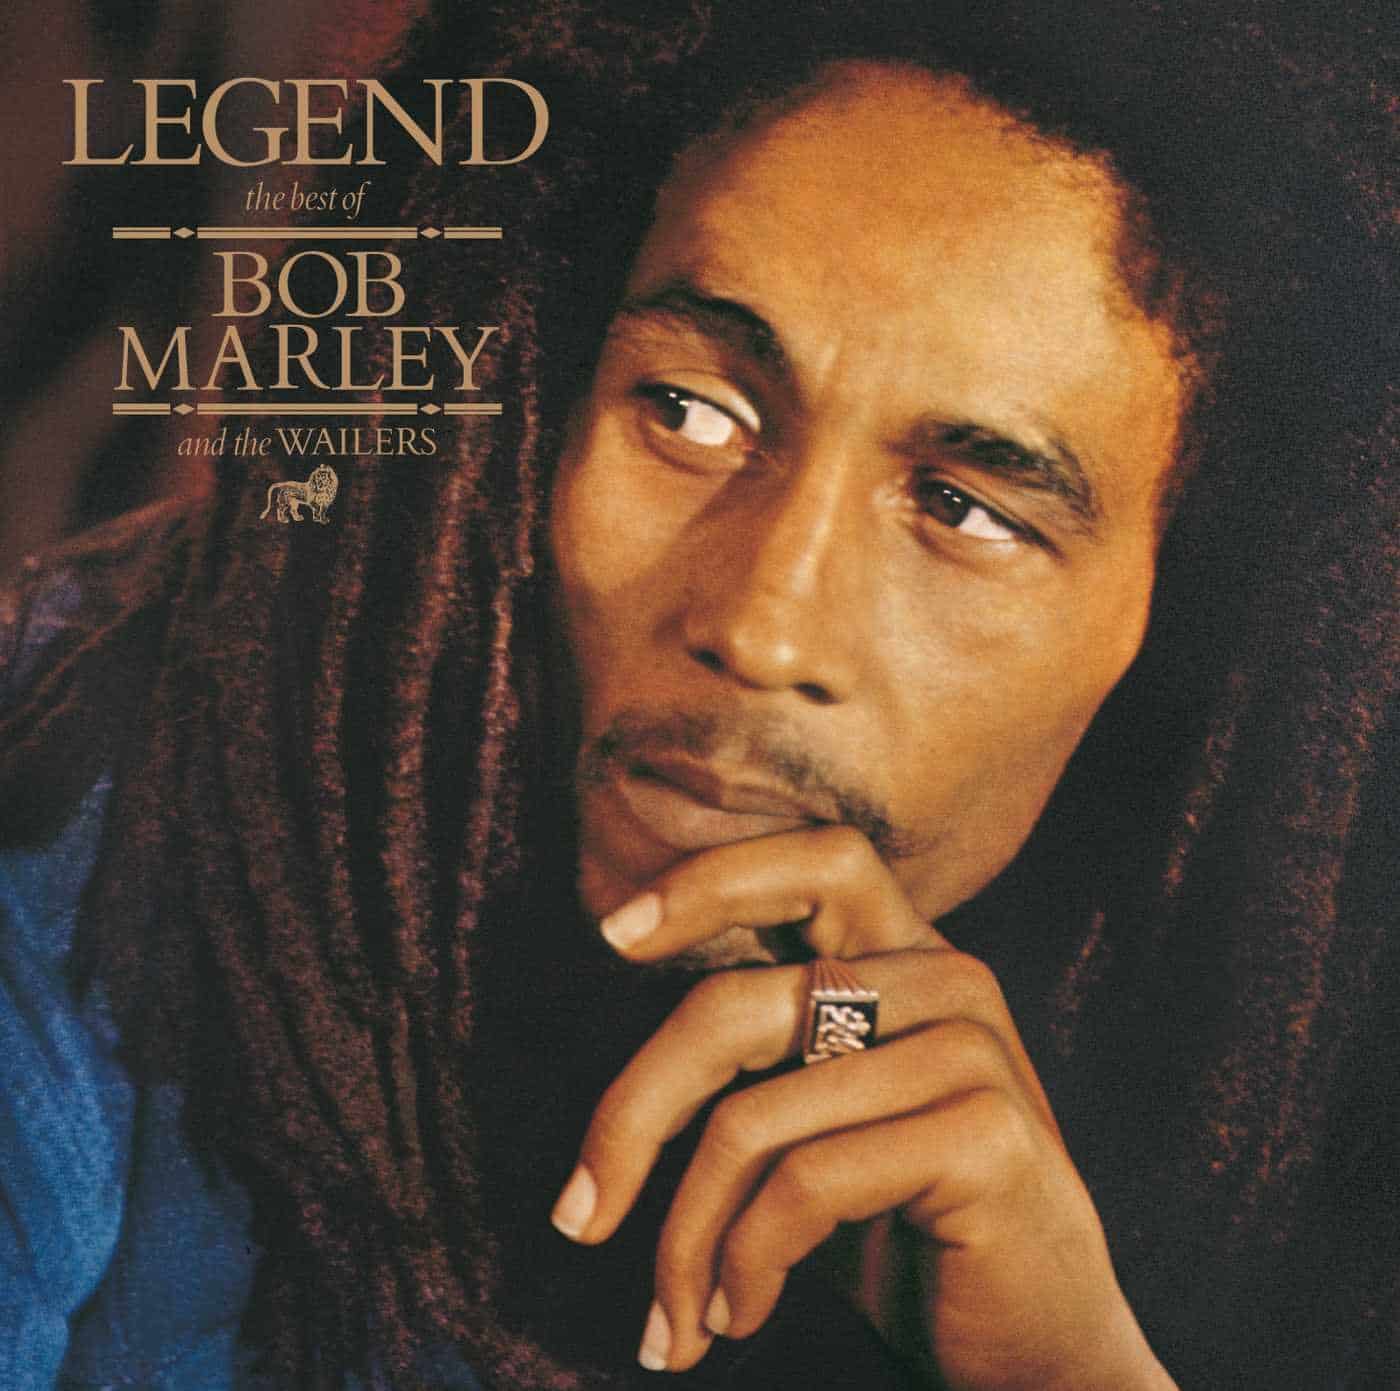 BOB MARLEY AND THE WAILERS - LEGEND (1LP PIC DISC)